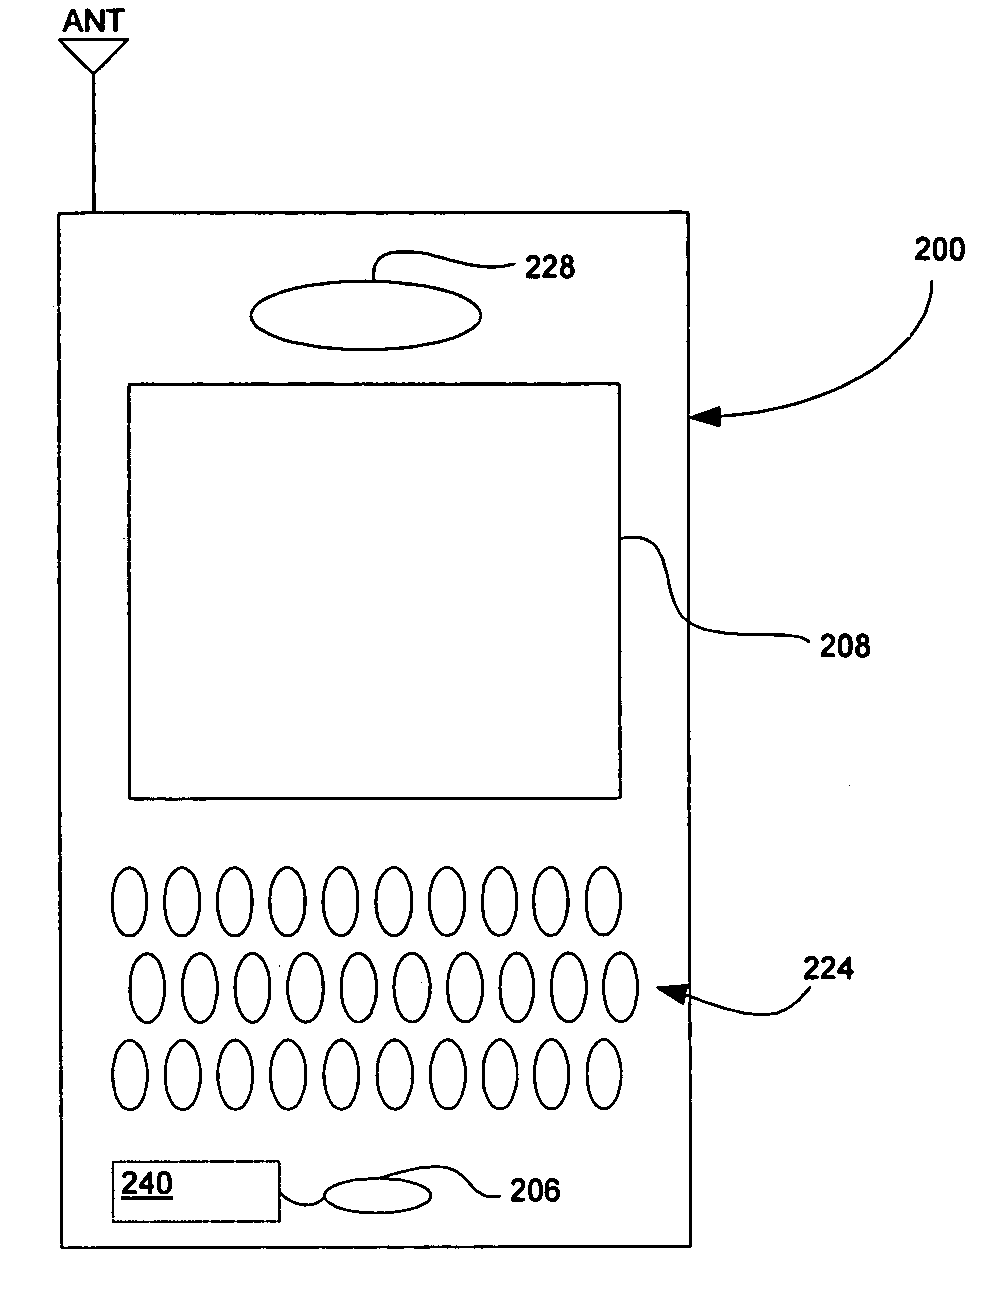 Device and method for embedding and retrieving information in digital images